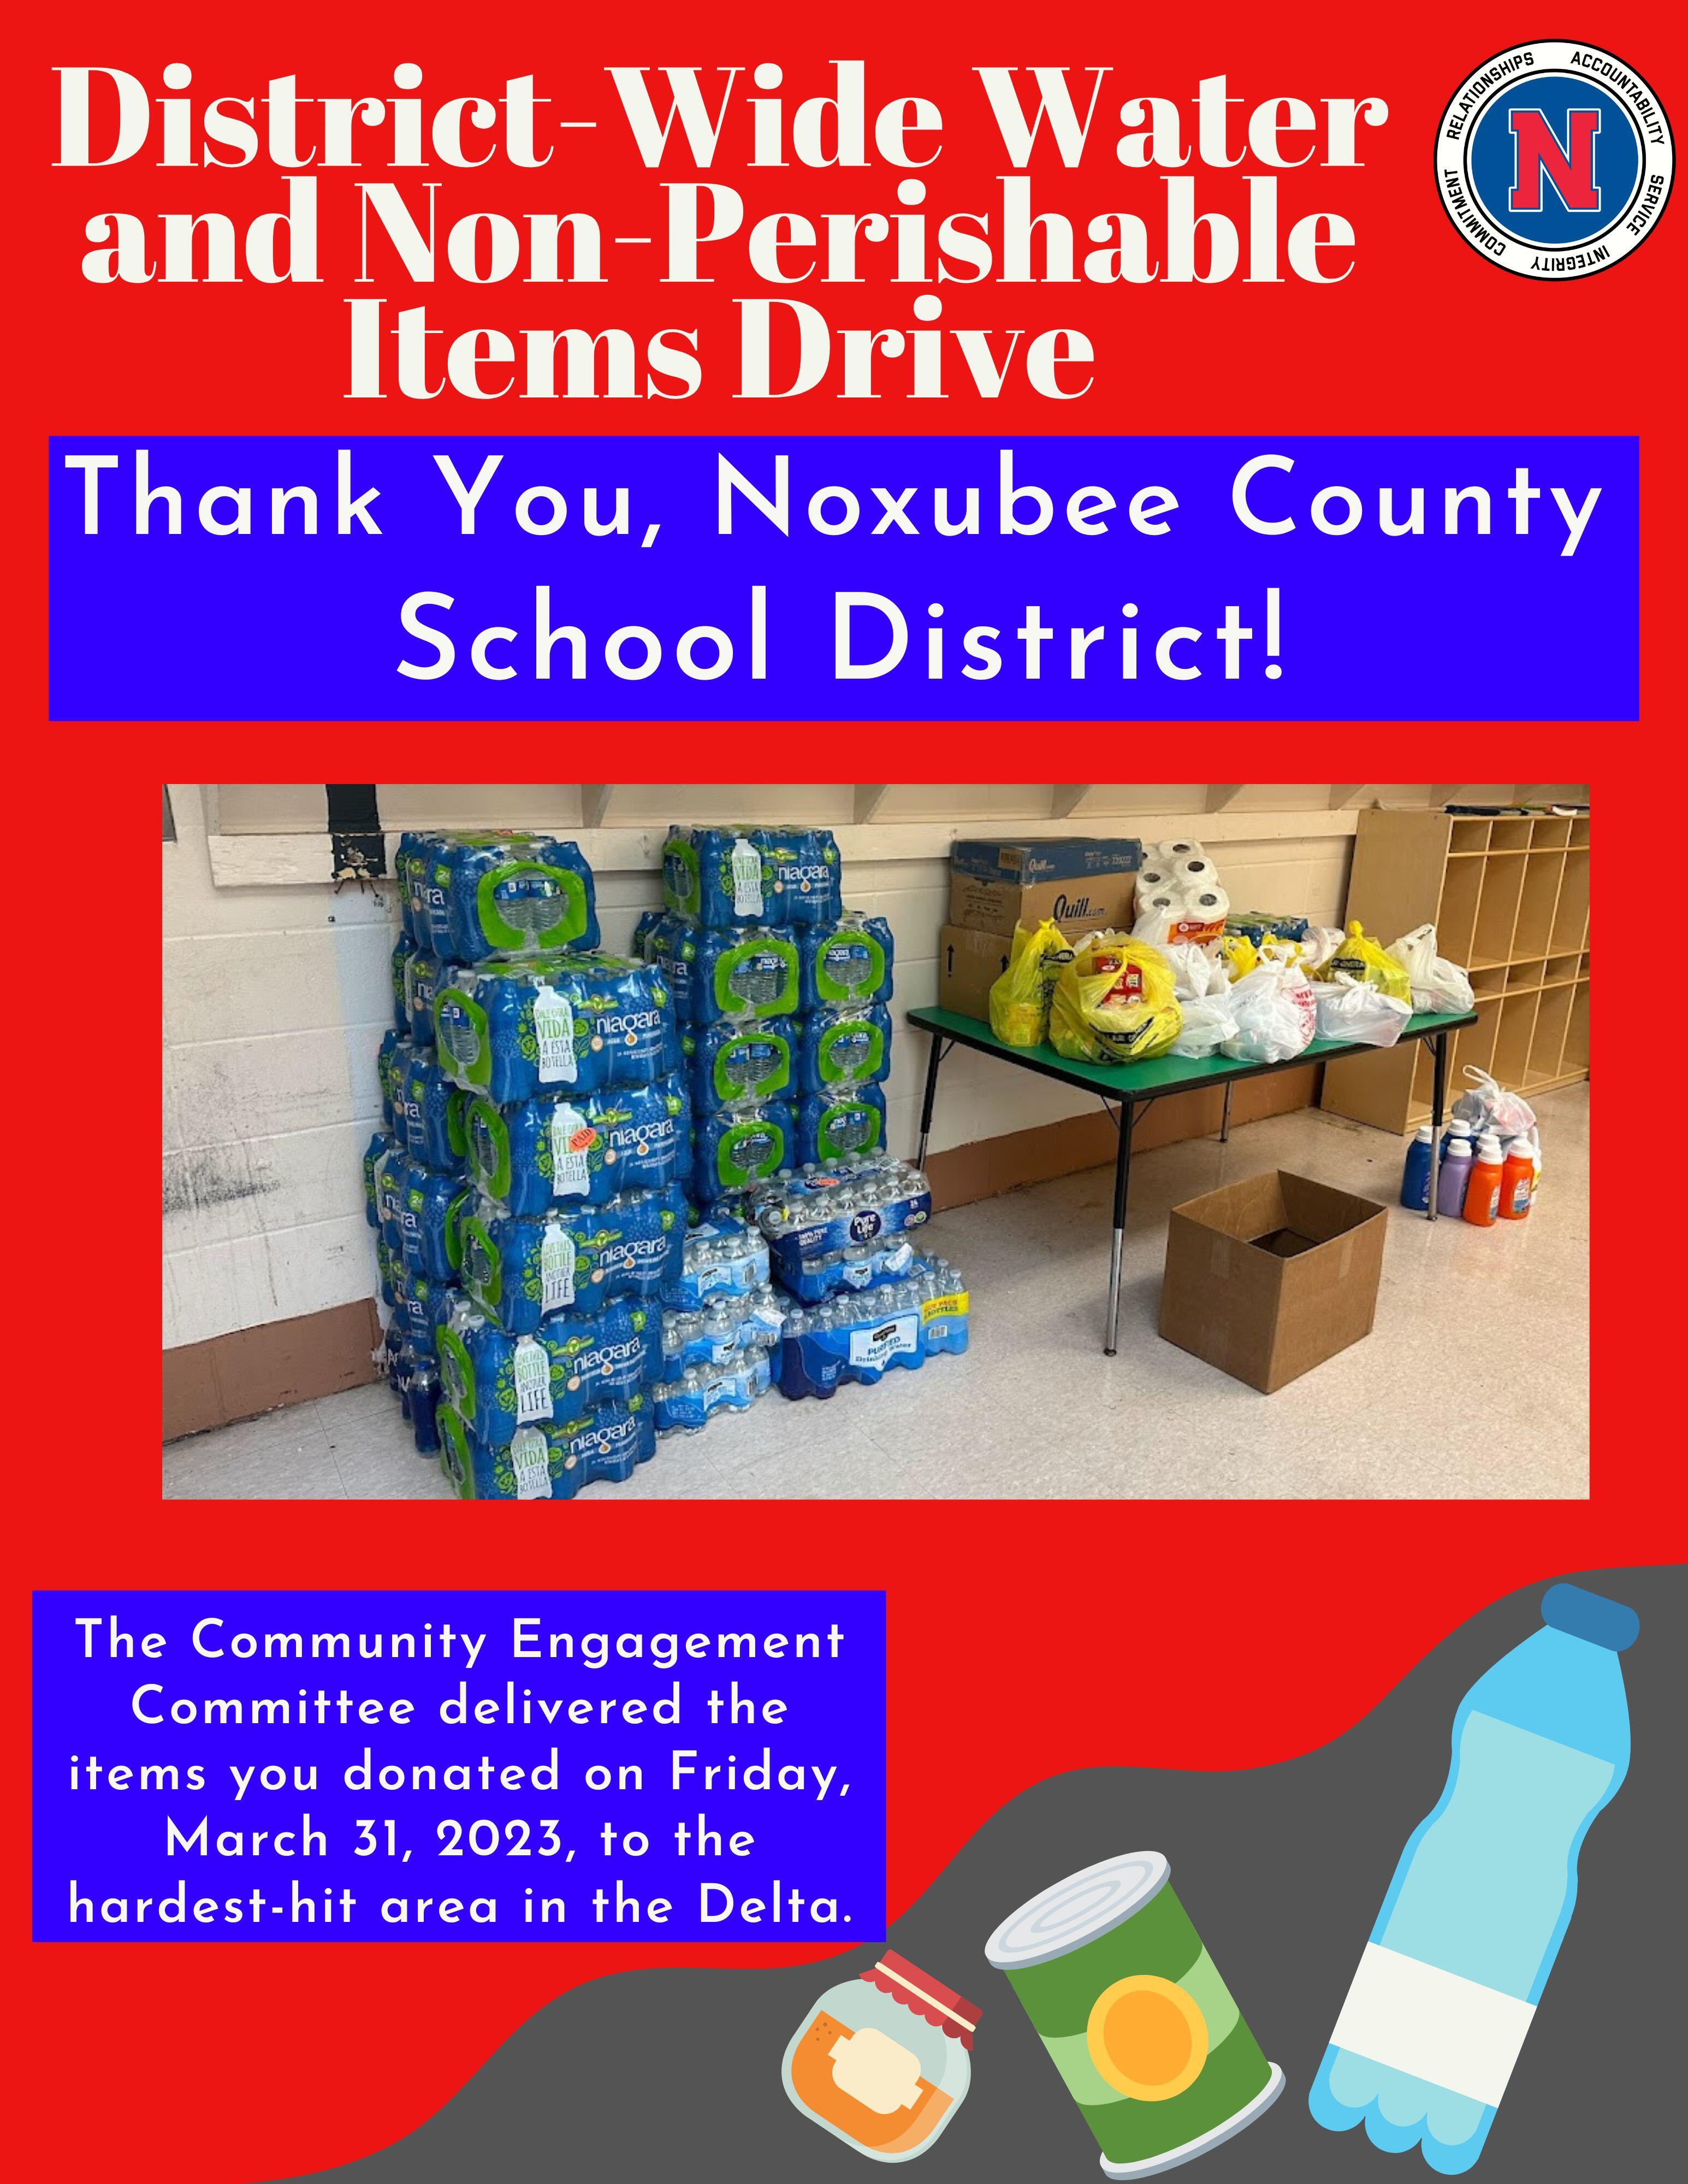 District-Wide Water and Non-Perishable Items Drive flyer 1